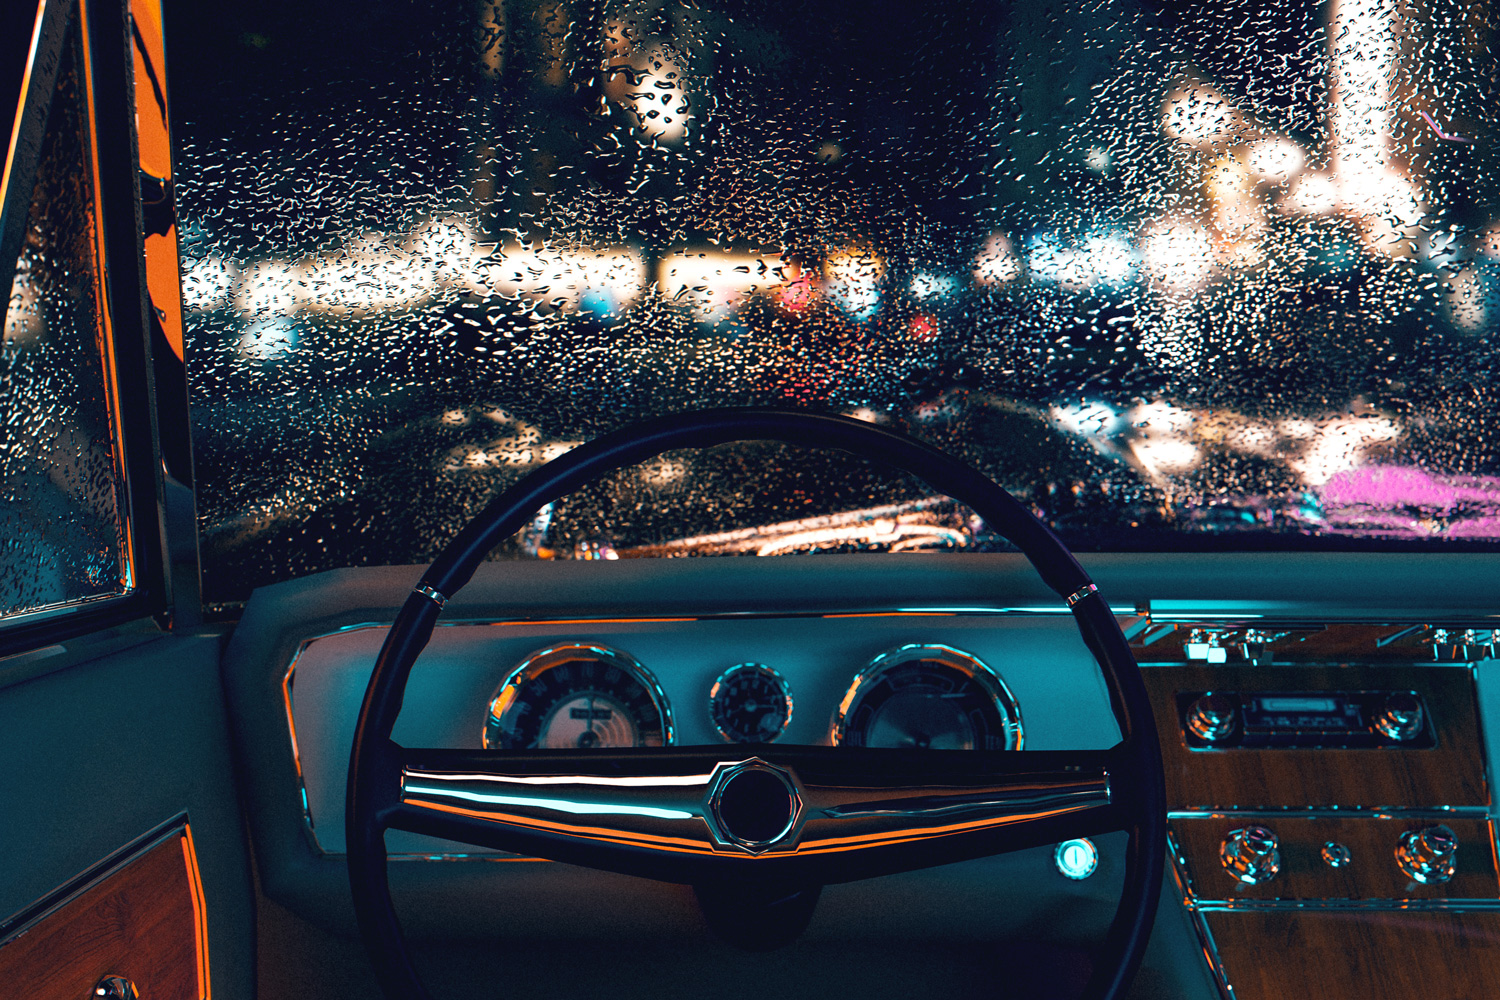 Digitally generated image of the inside of an vintage car with old steering wheel. Concept of a film noir scene at night with city lights and rain.